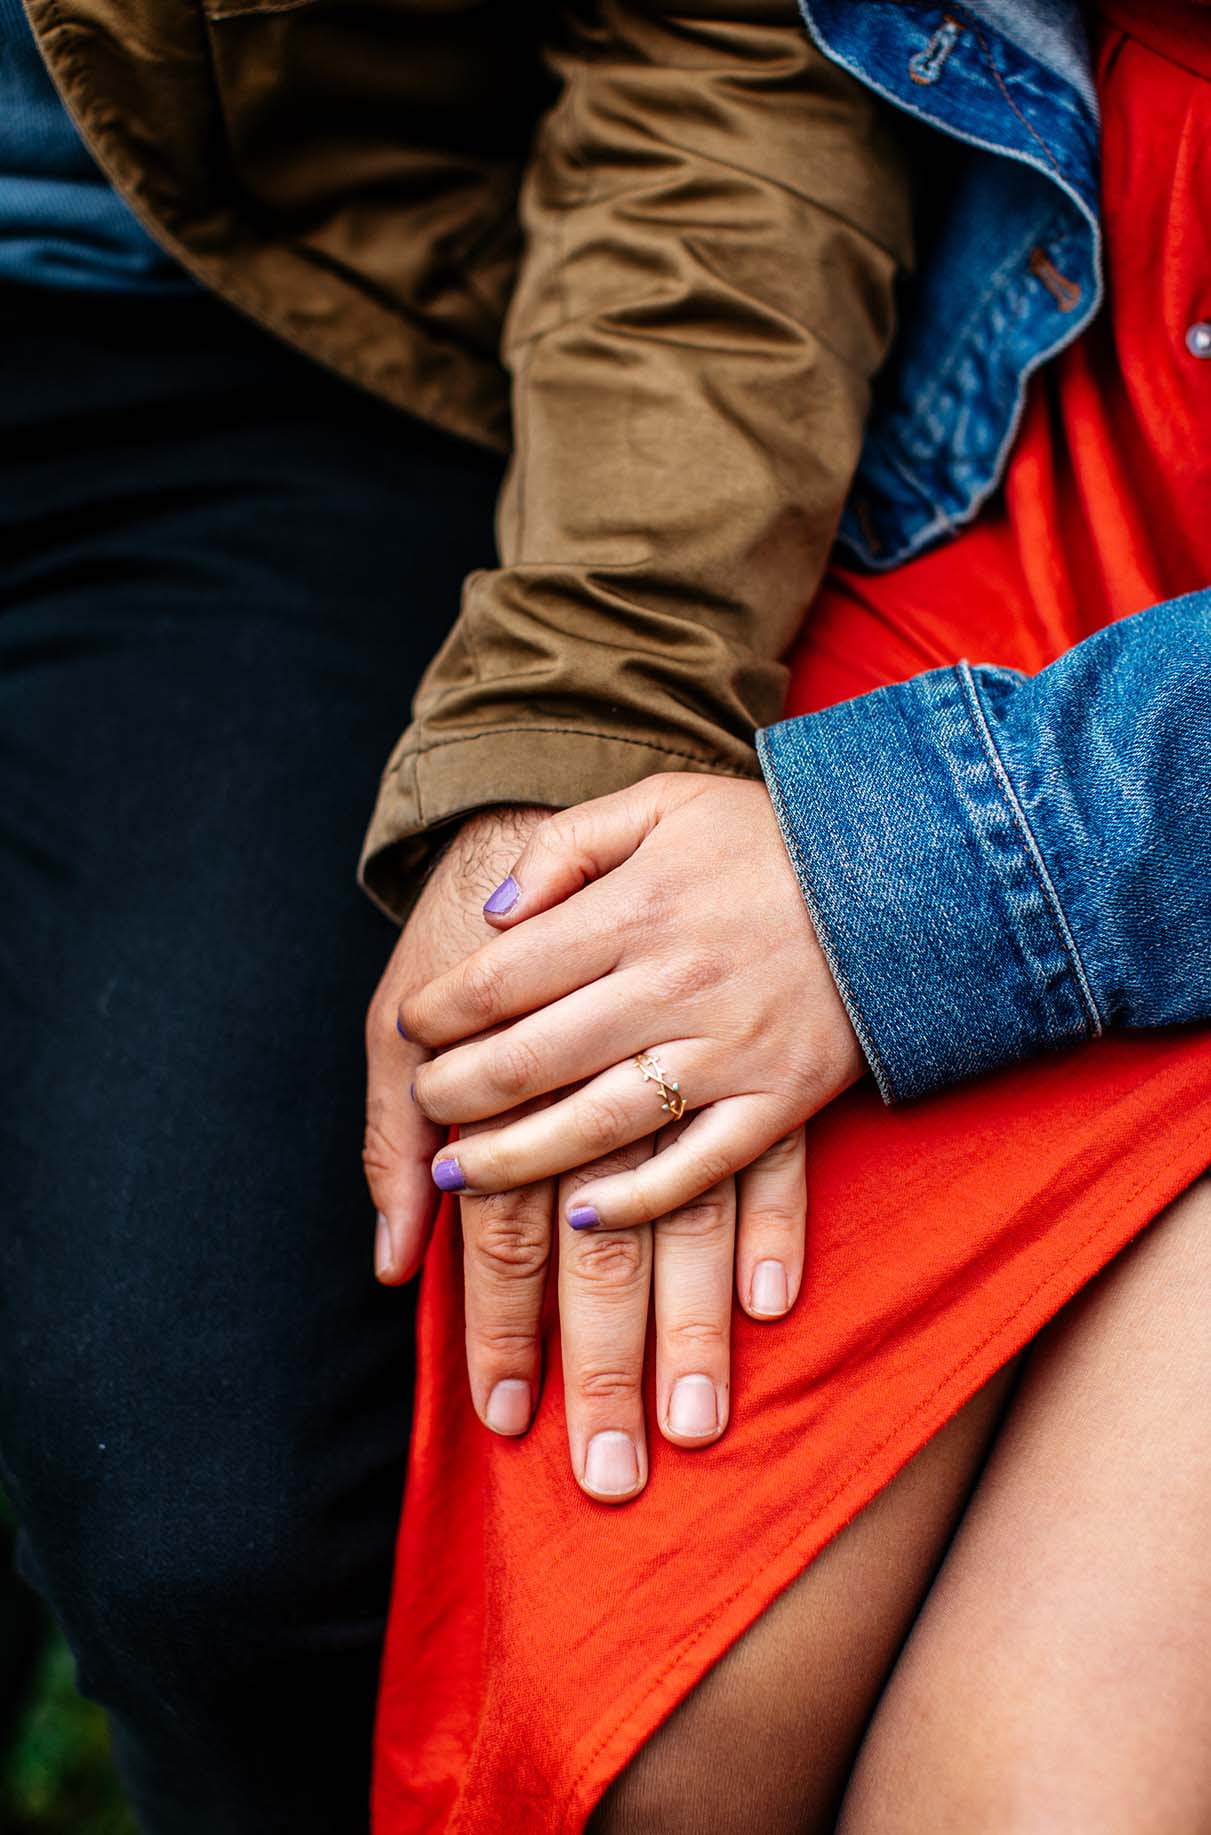 Man and womans hands rest on woman's leg, showing off her engagement ring